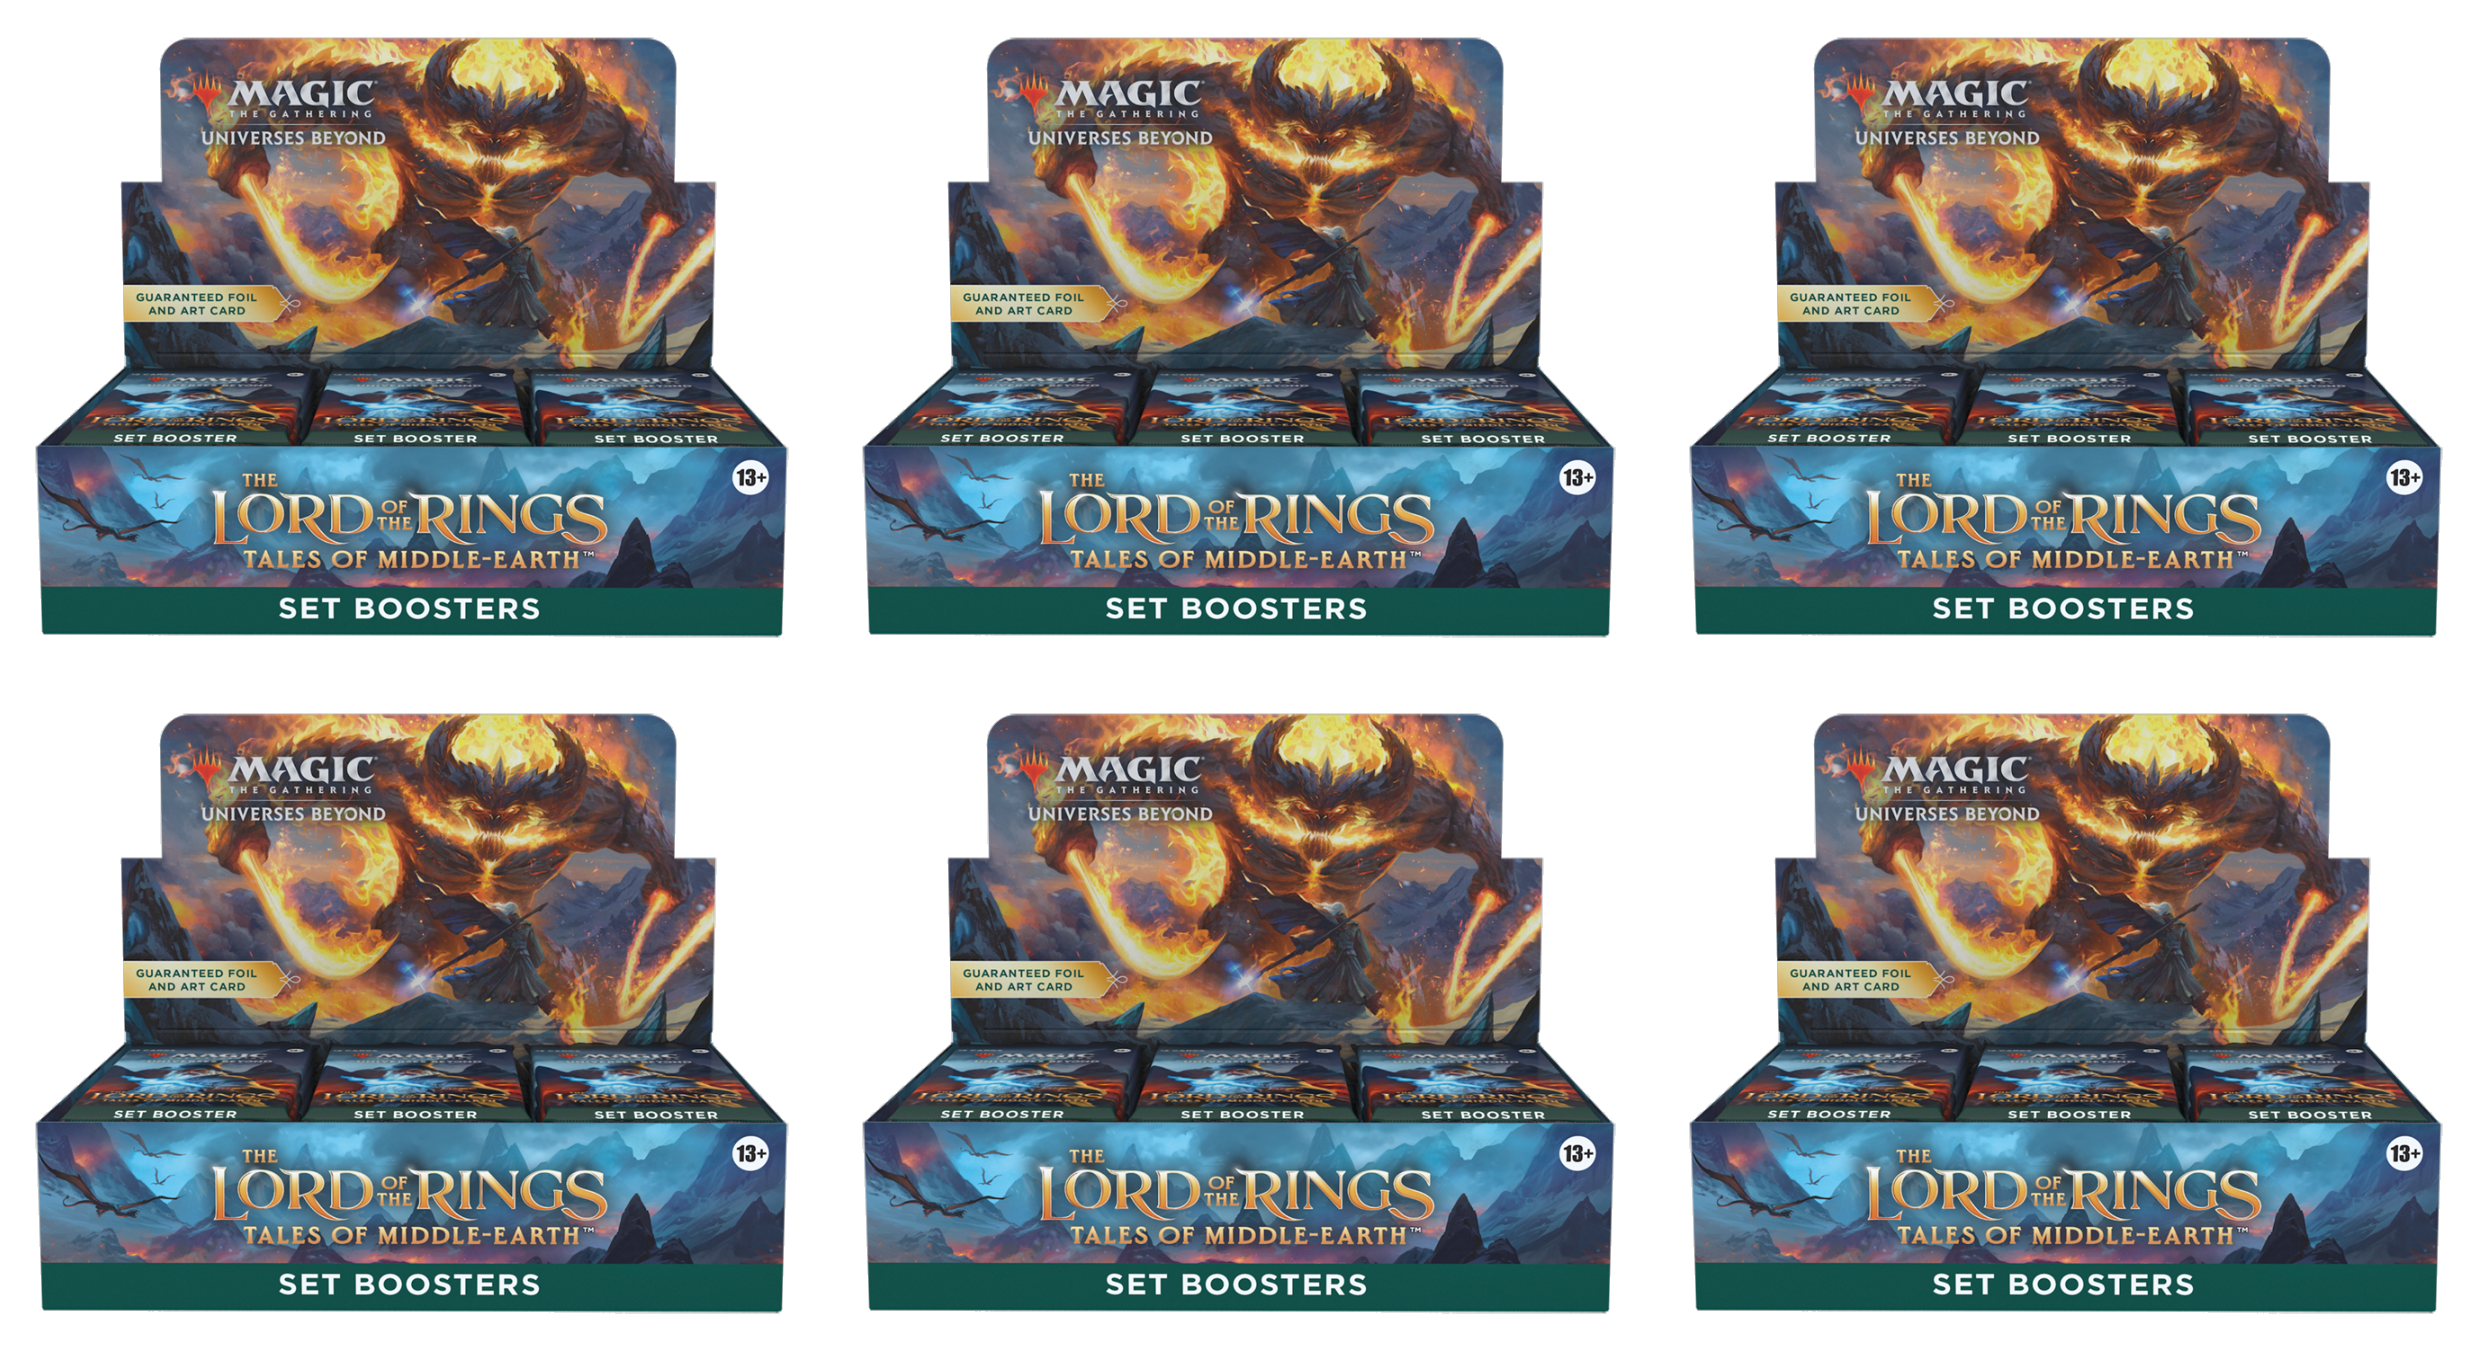 The Lord of the Rings: Tales of Middle-earth - Set Booster Case | Devastation Store